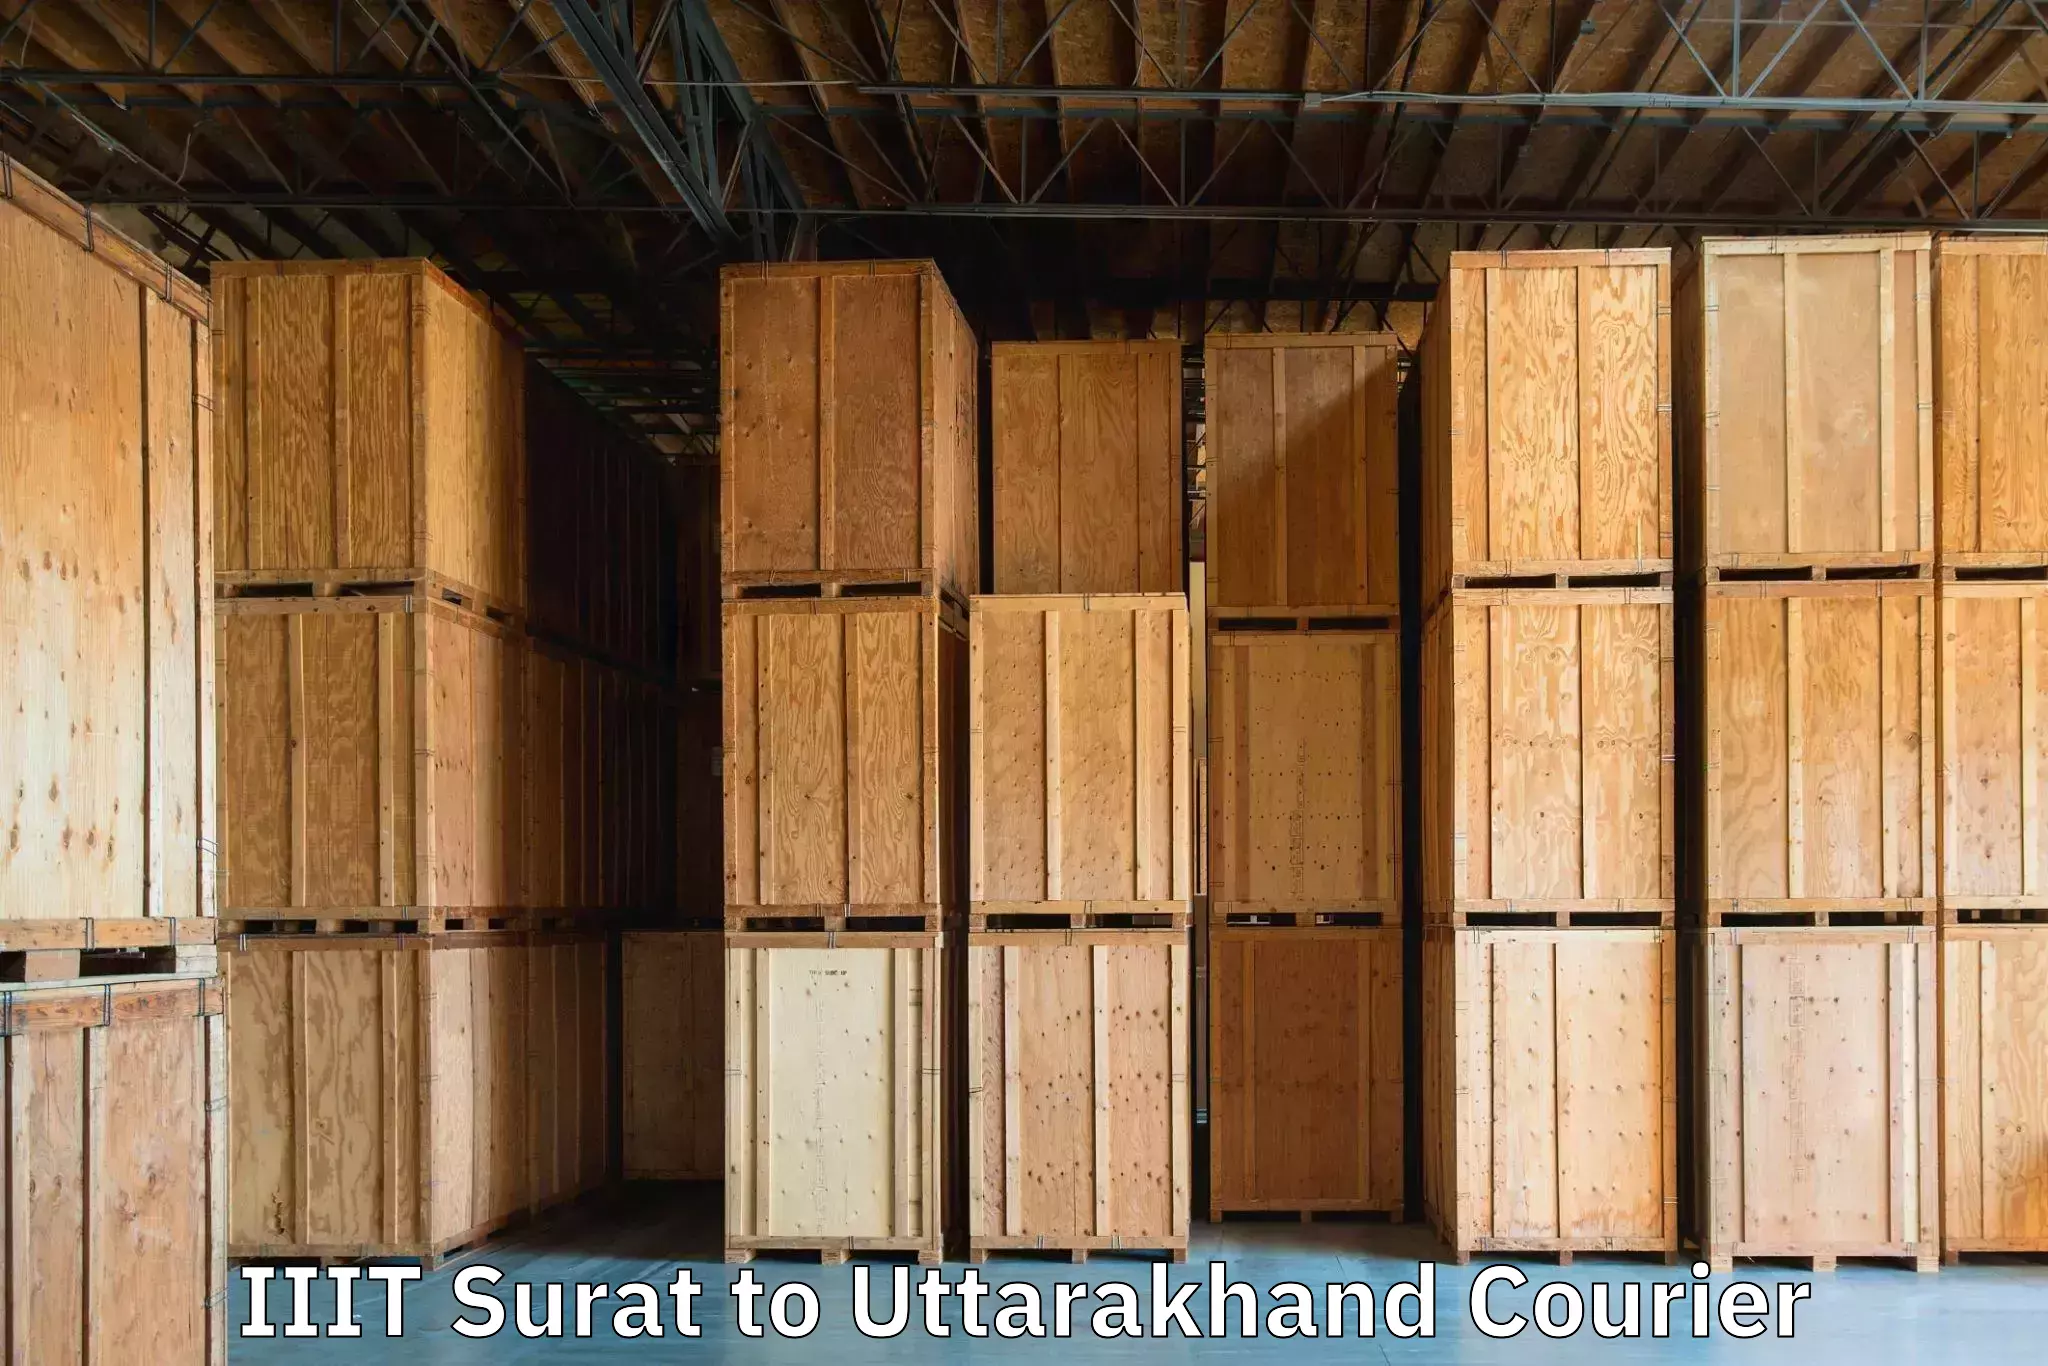 Automated luggage transport in IIIT Surat to Rudraprayag